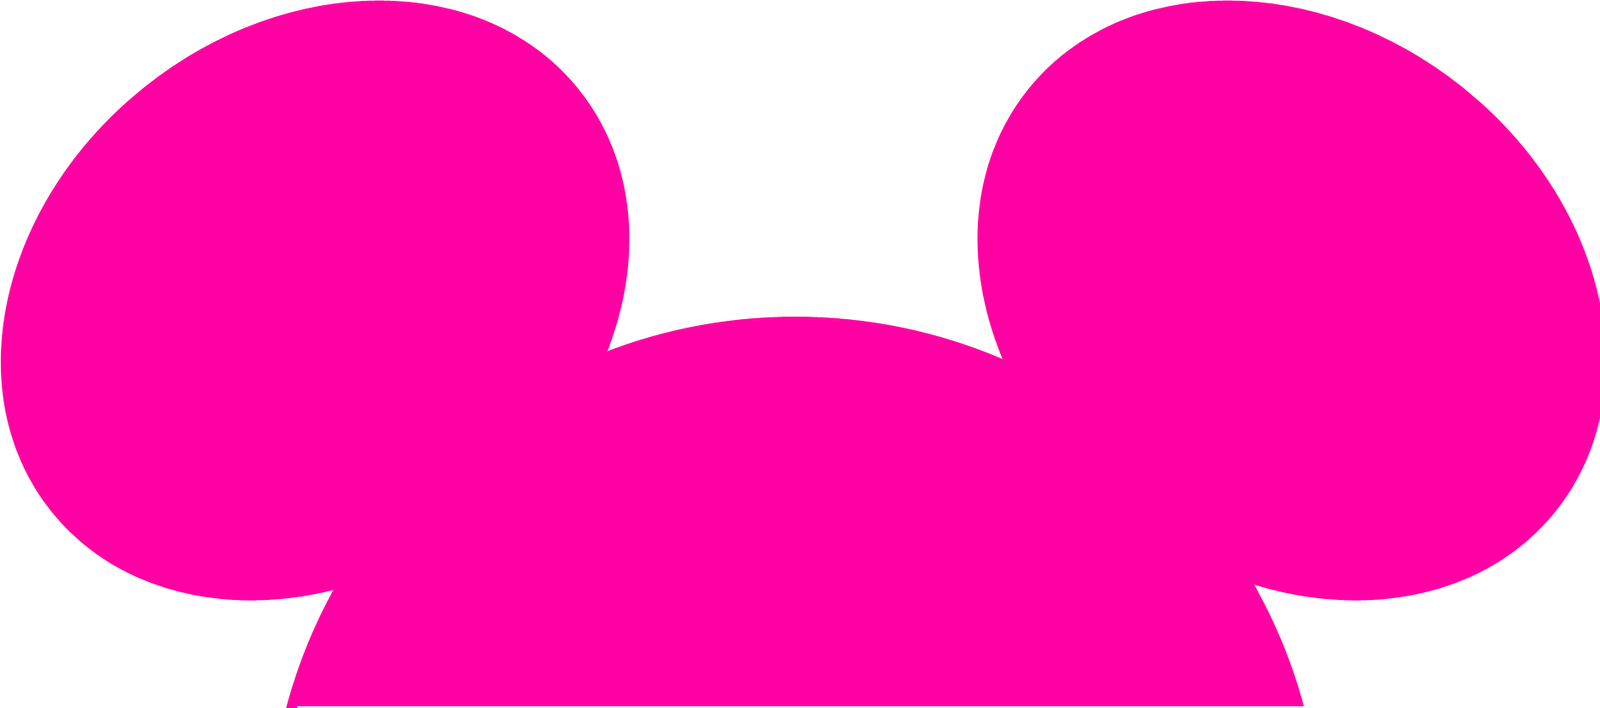 Minnie Mouse Ears Pink Silhouette PNG image